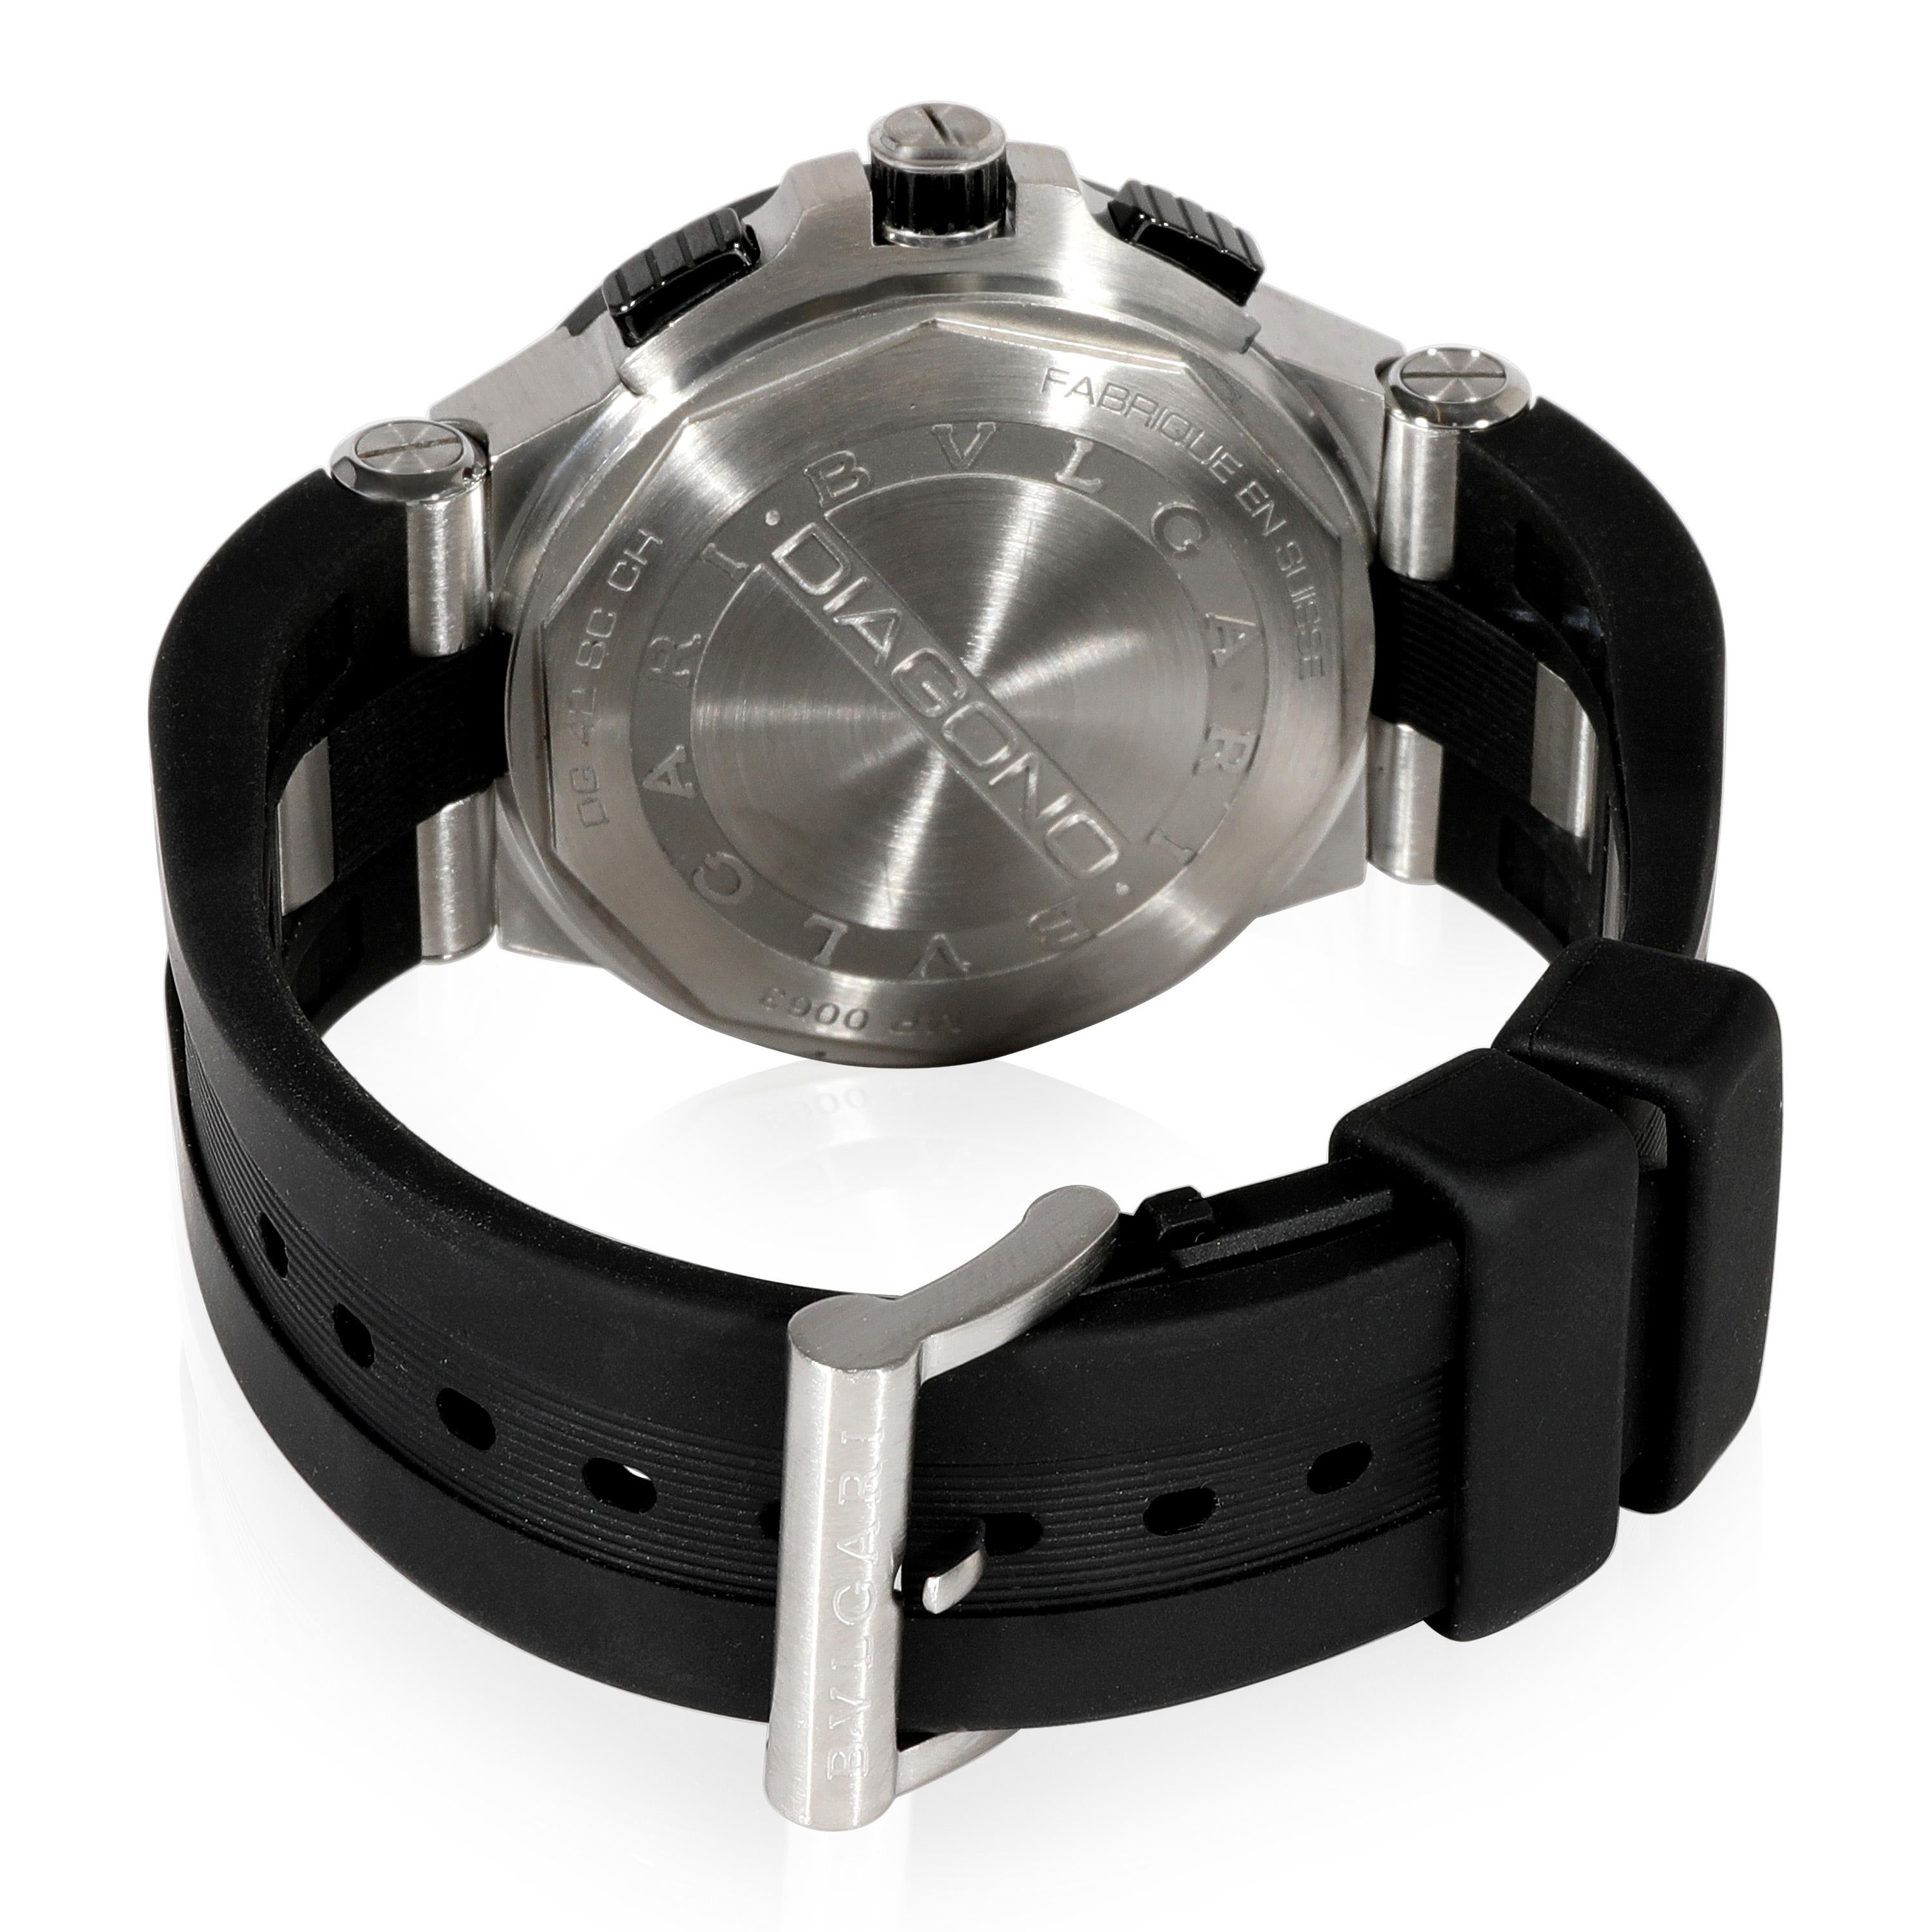 BVLGARI Diagono DG42SCCH Men's Watch in  Stainless Steel/Ceramic

SKU: 118949

PRIMARY DETAILS
Brand: BVLGARI
Model: Diagono
Country of Origin: Switzerland
Movement Type: Mechanical: Automatic/Kinetic
Year of Manufacture: 2010-2019
Condition: Retail